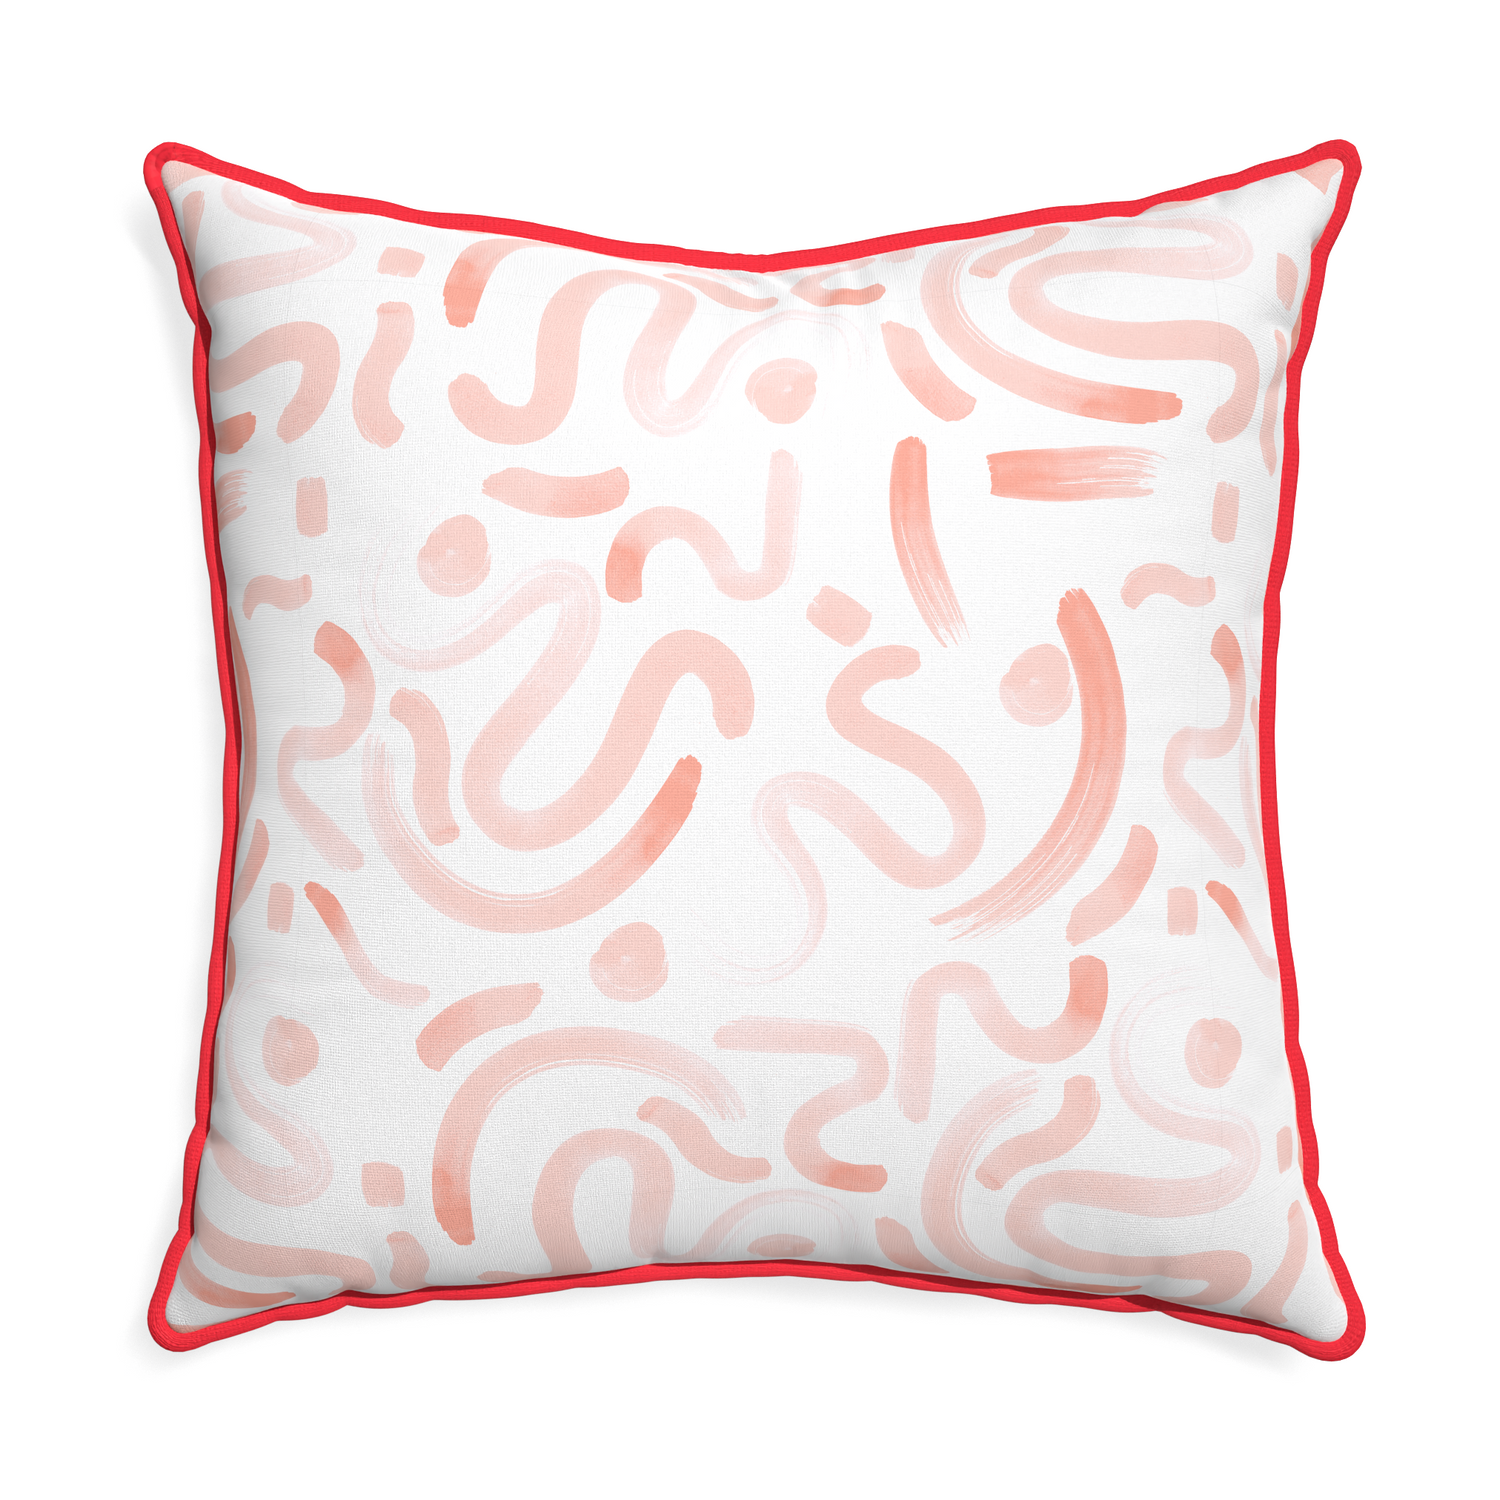 Euro-sham hockney pink custom pink graphicpillow with cherry piping on white background